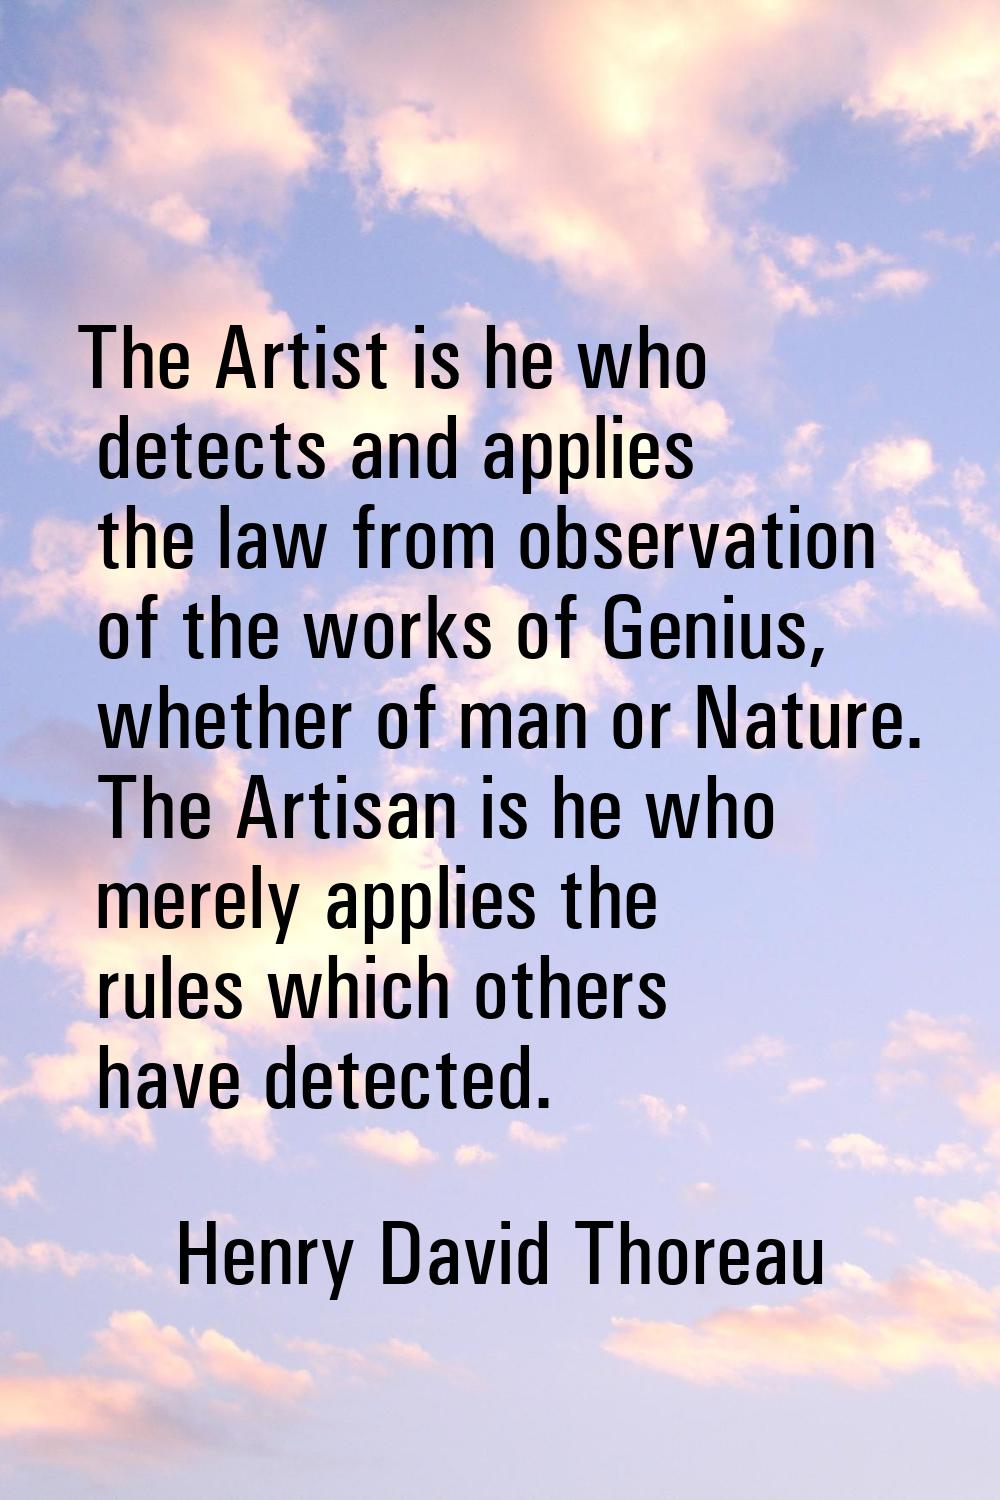 The Artist is he who detects and applies the law from observation of the works of Genius, whether o